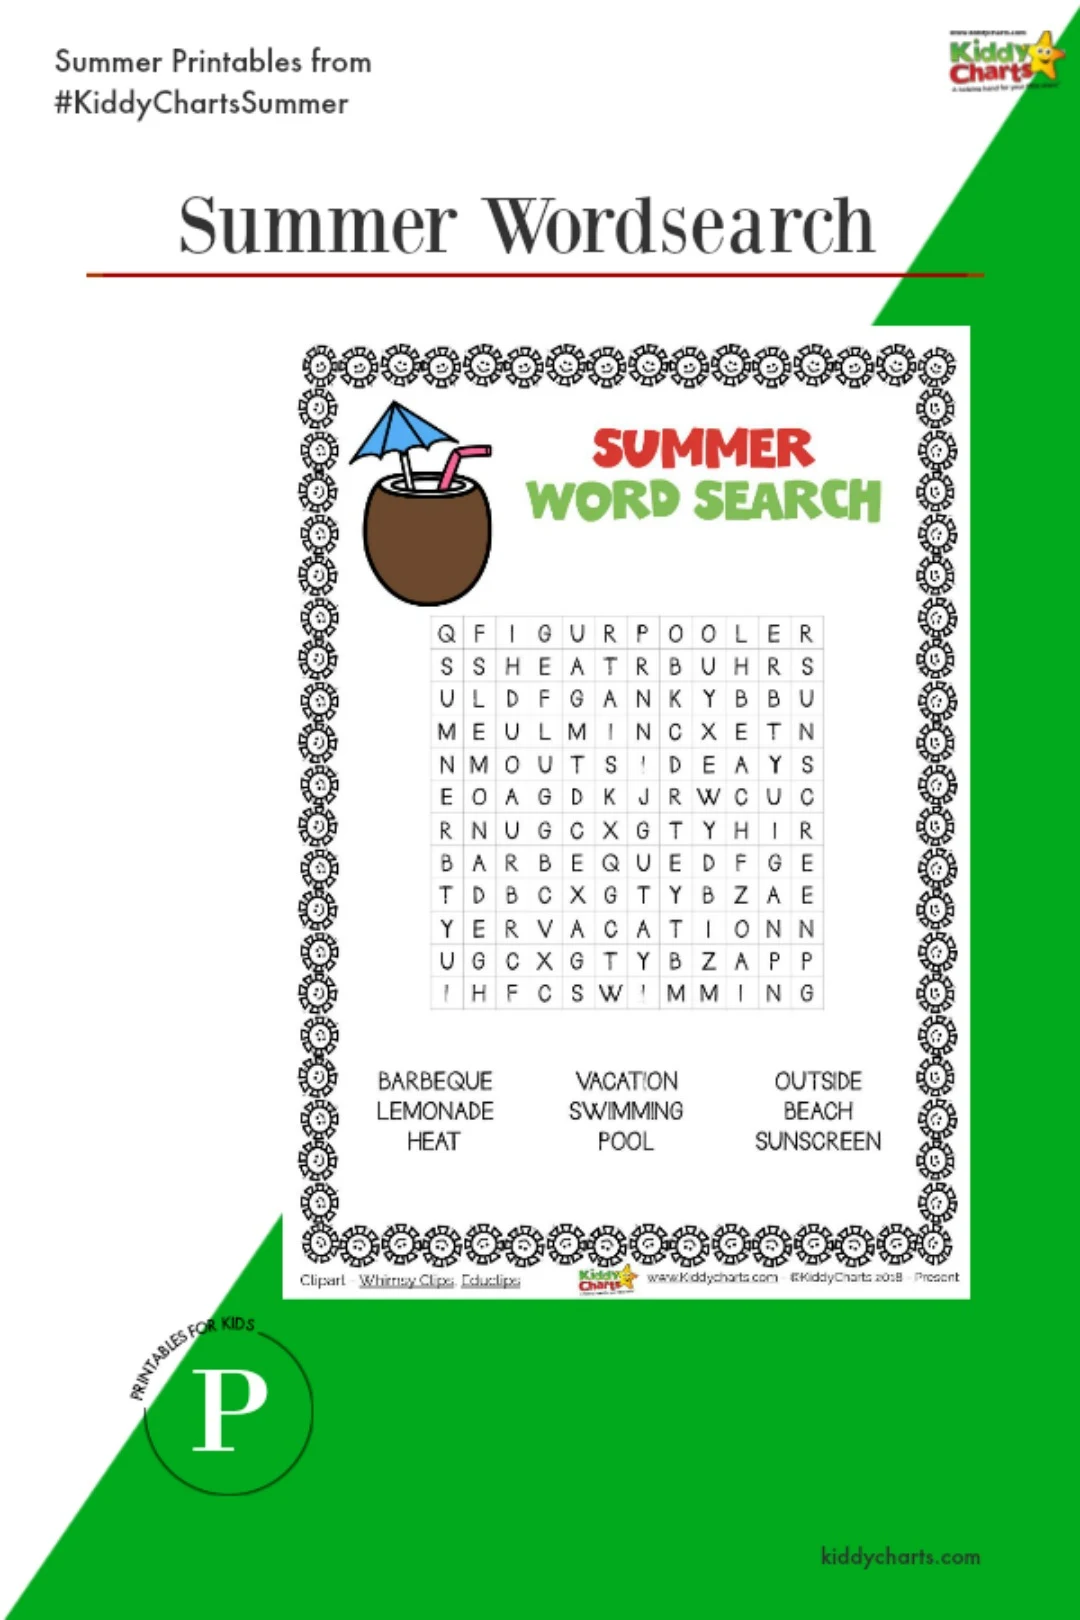 A summer wordsearch for the kids to try out - alongside all our other activities for the summer. Why not check them out on the site? #printables #kids #summer